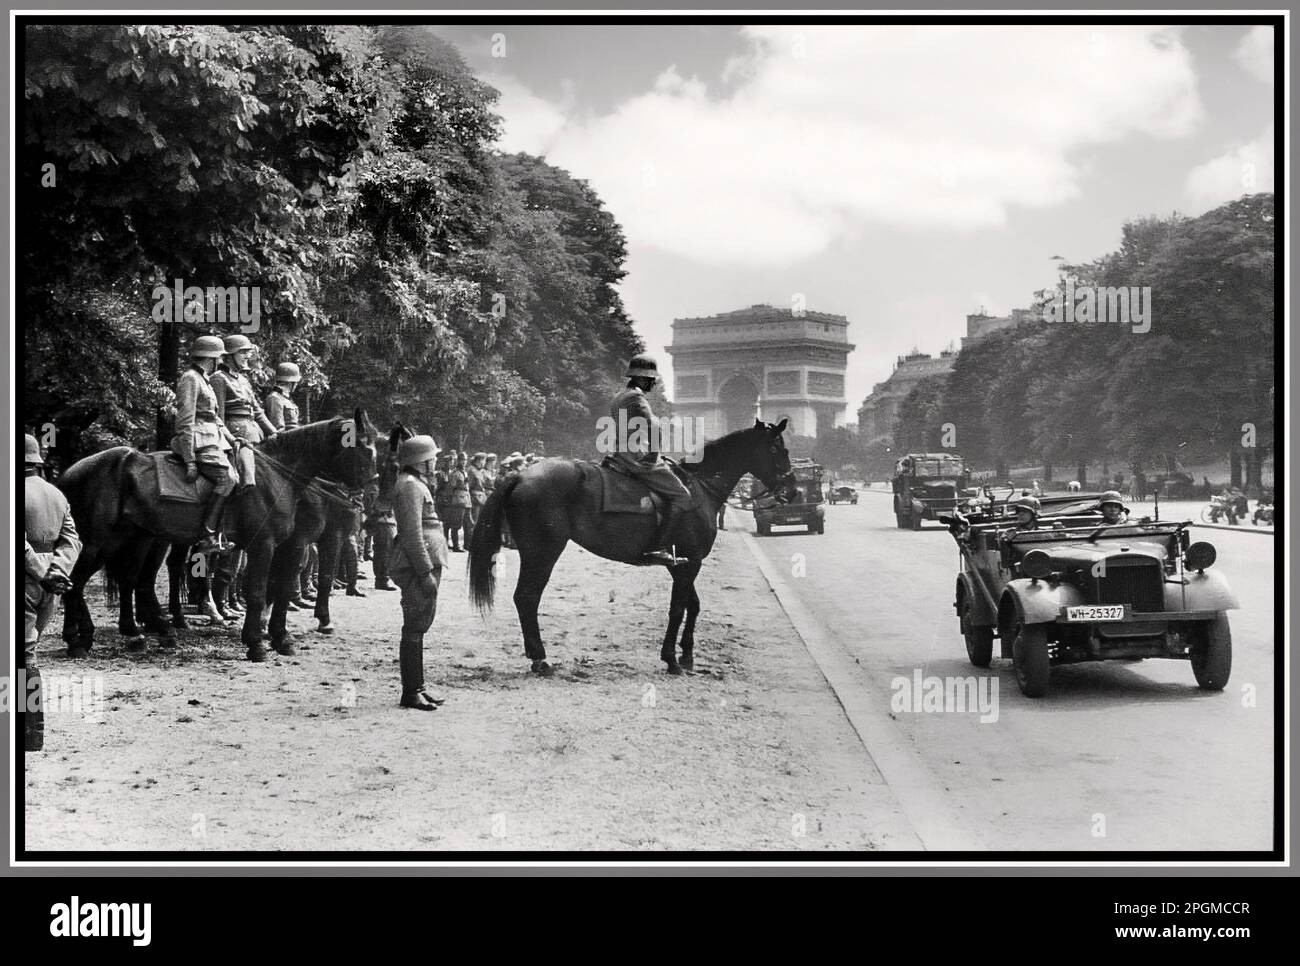 PARIS FRANCE NAZI OCCUPATION World War II 1940 Nazi German occupying forces enter Paris German soldiers parade down Avenue Foch with Arc de Triomphe behind Paris France 14 June 1940  Avenue Foch where the 30 .Infanterie-Division is saluted by General Kurt von Briesen. Stock Photo